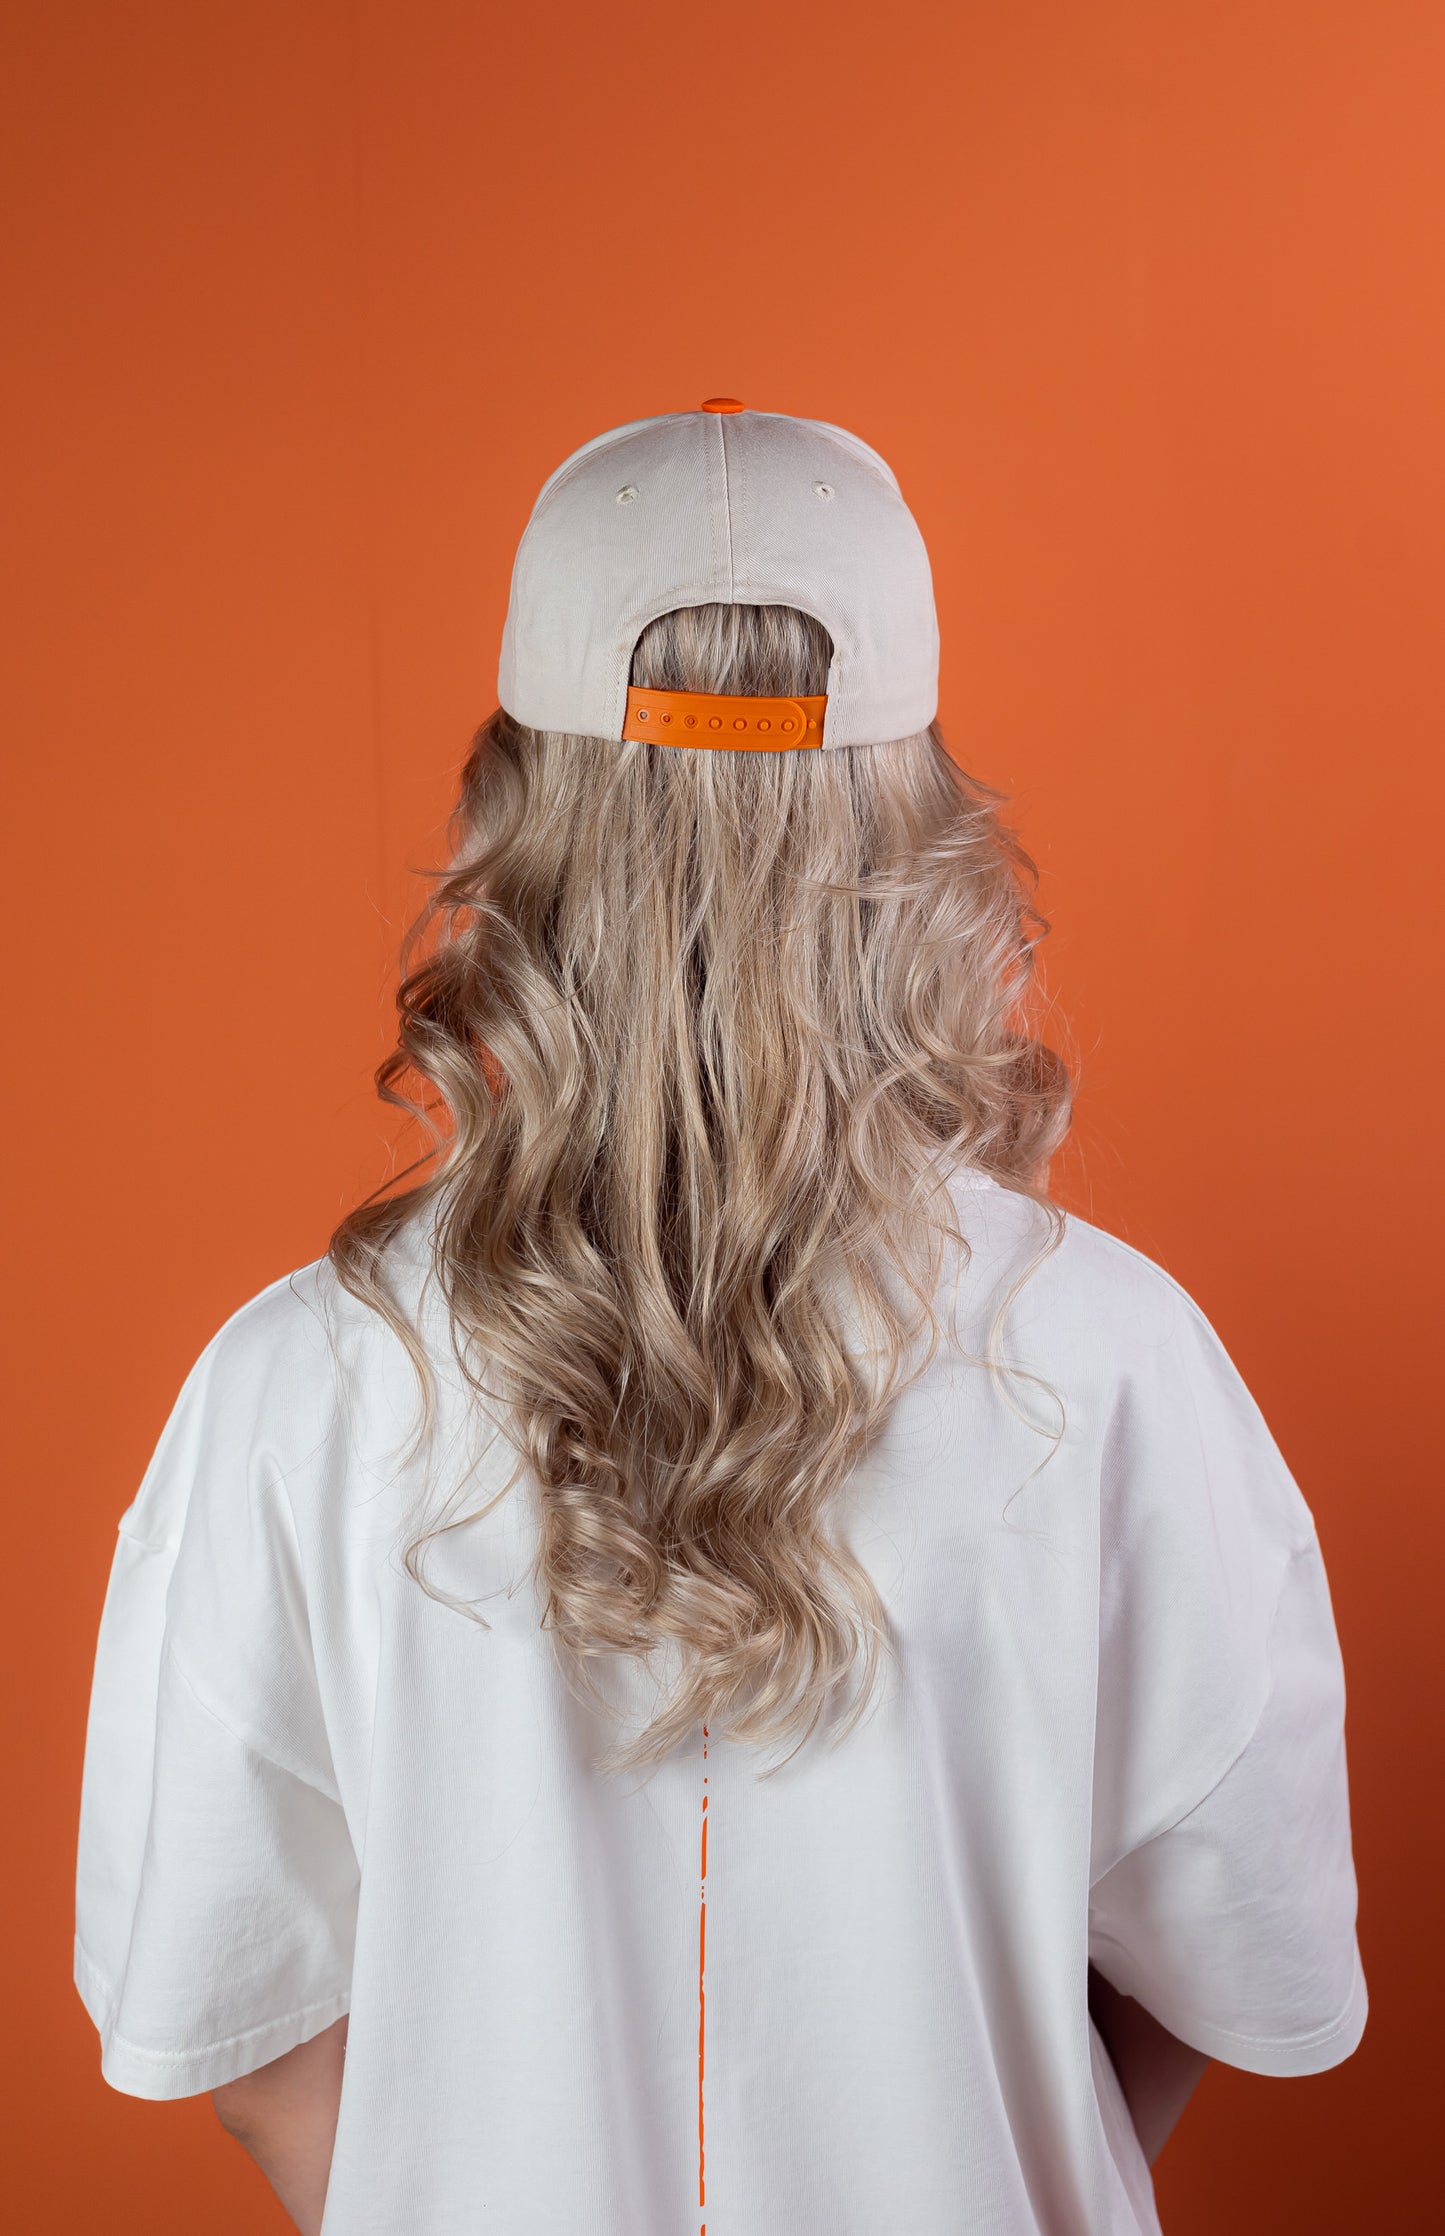 Female Model wearing a White cap with orange shield with "be nice" writing on the front